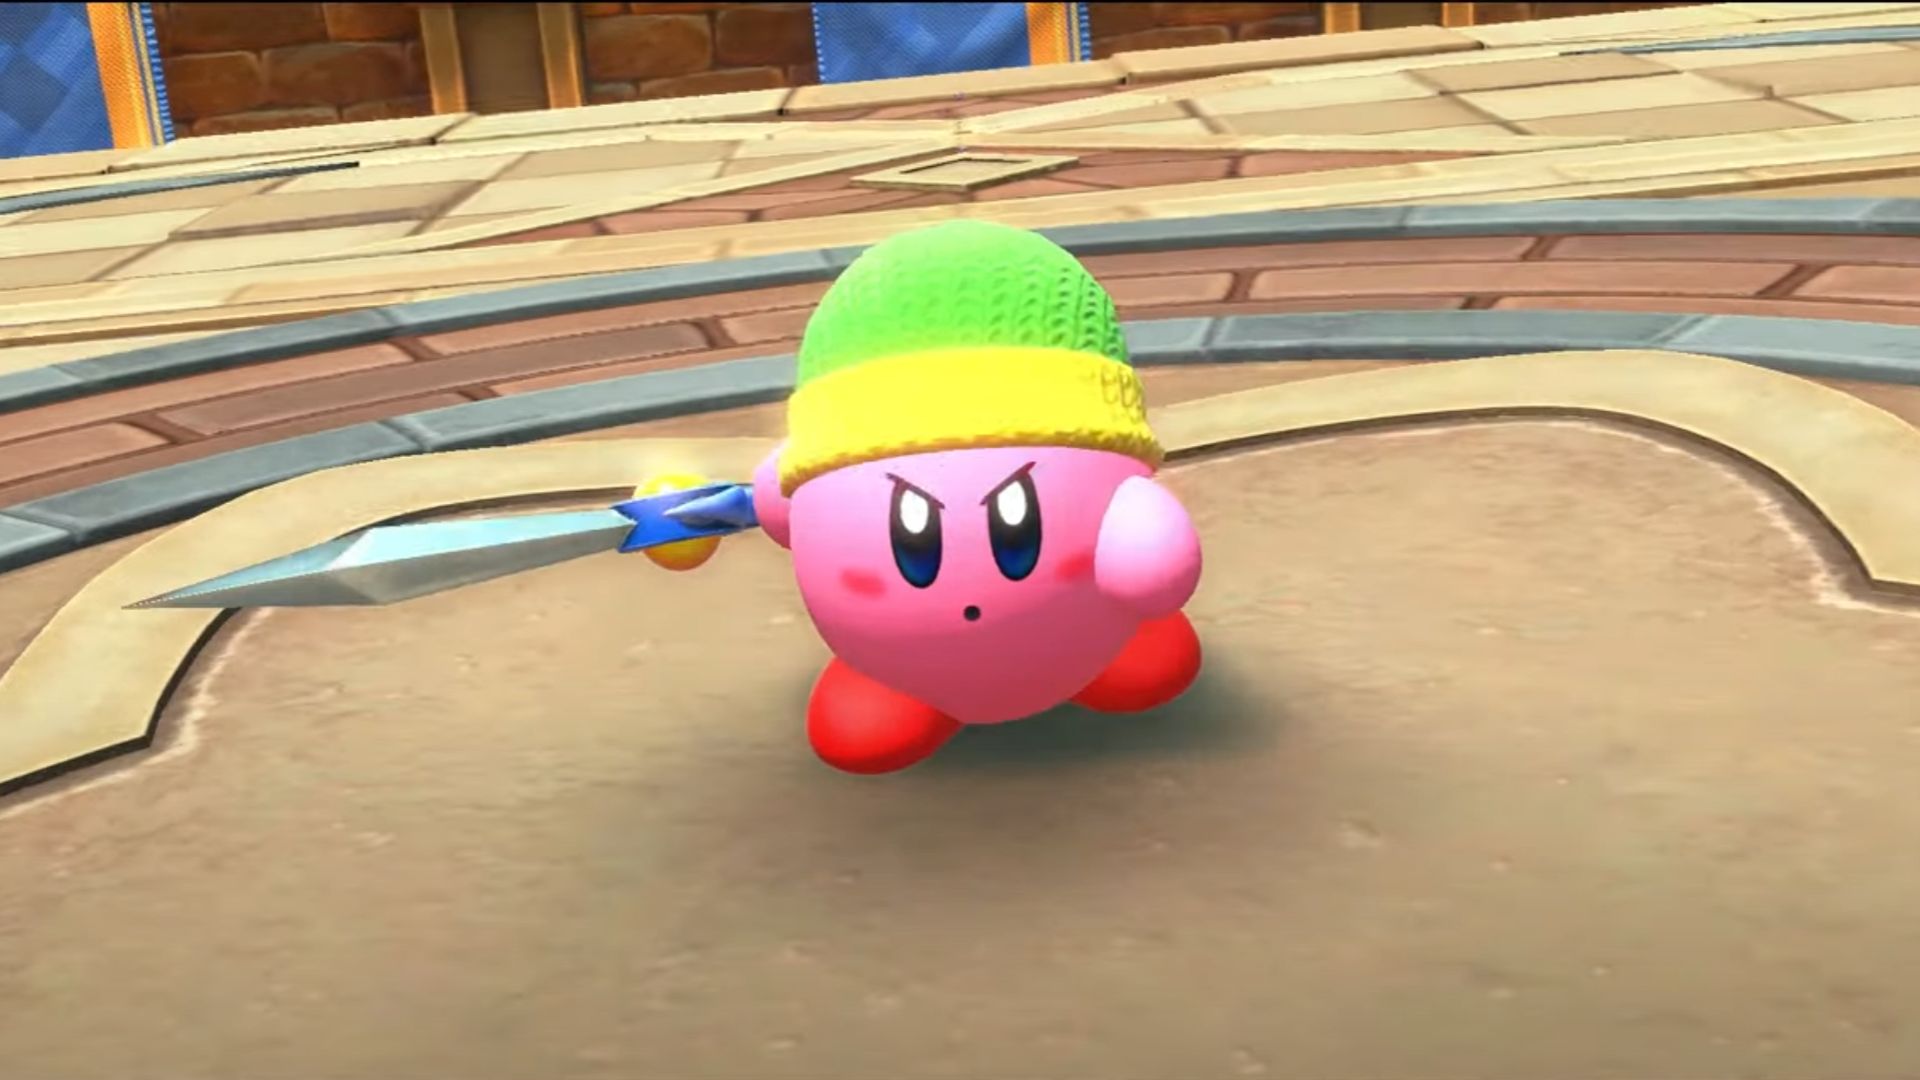 Kirby's Dream Land is actually a Super Smash Bros. game in disguise |  GamesRadar+